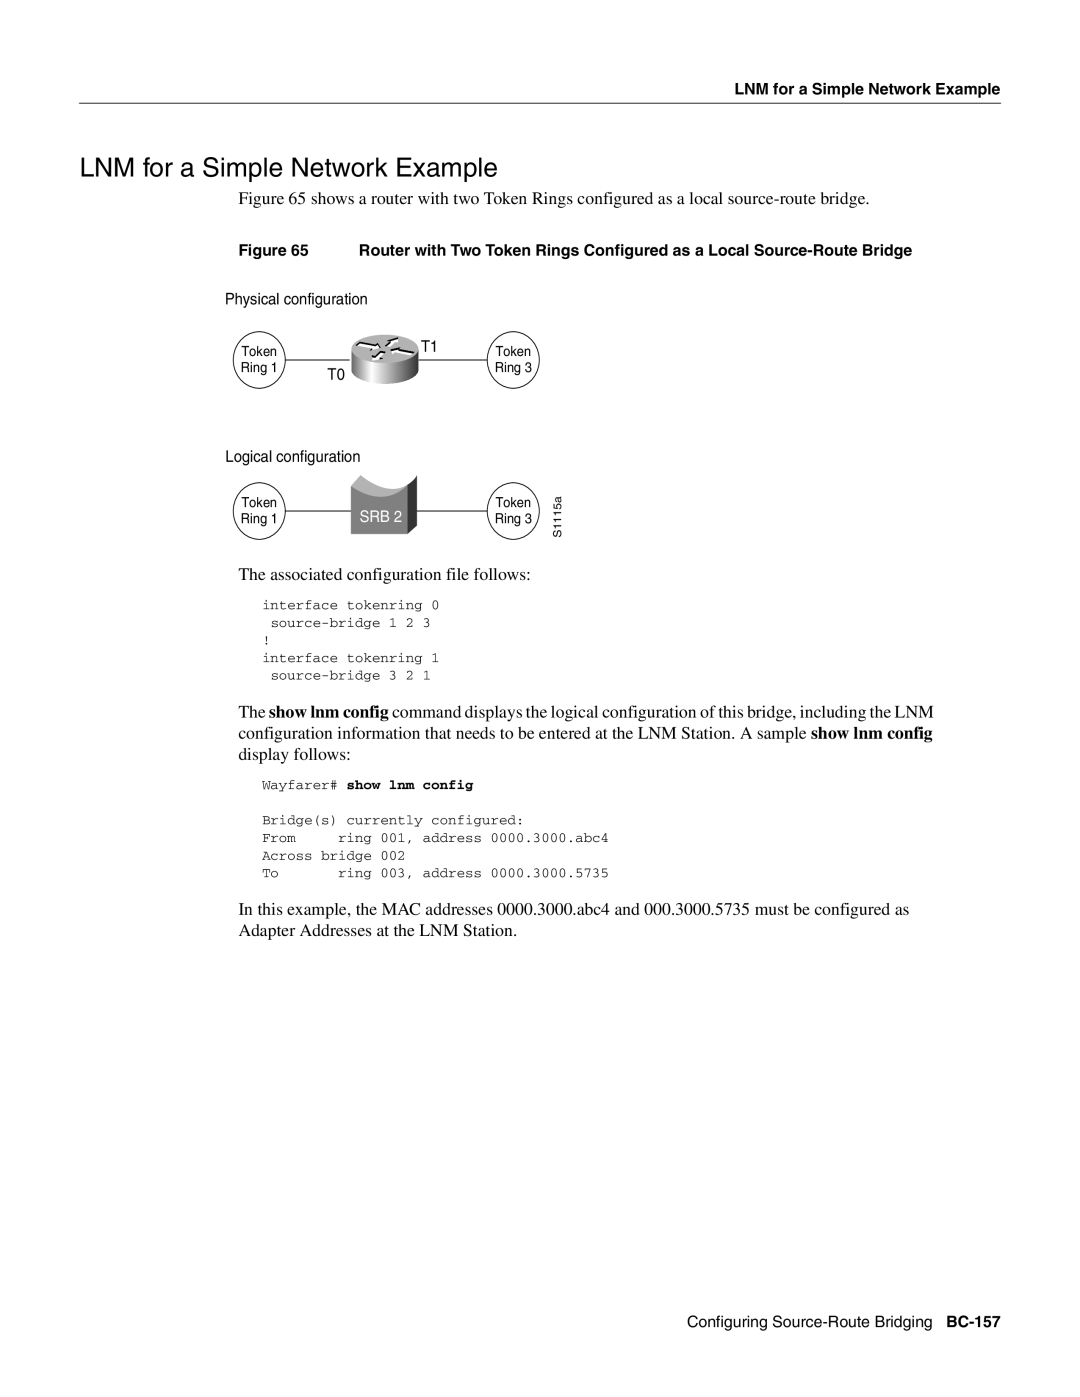 Cisco Systems BC-109 manual LNM for a Simple Network Example 